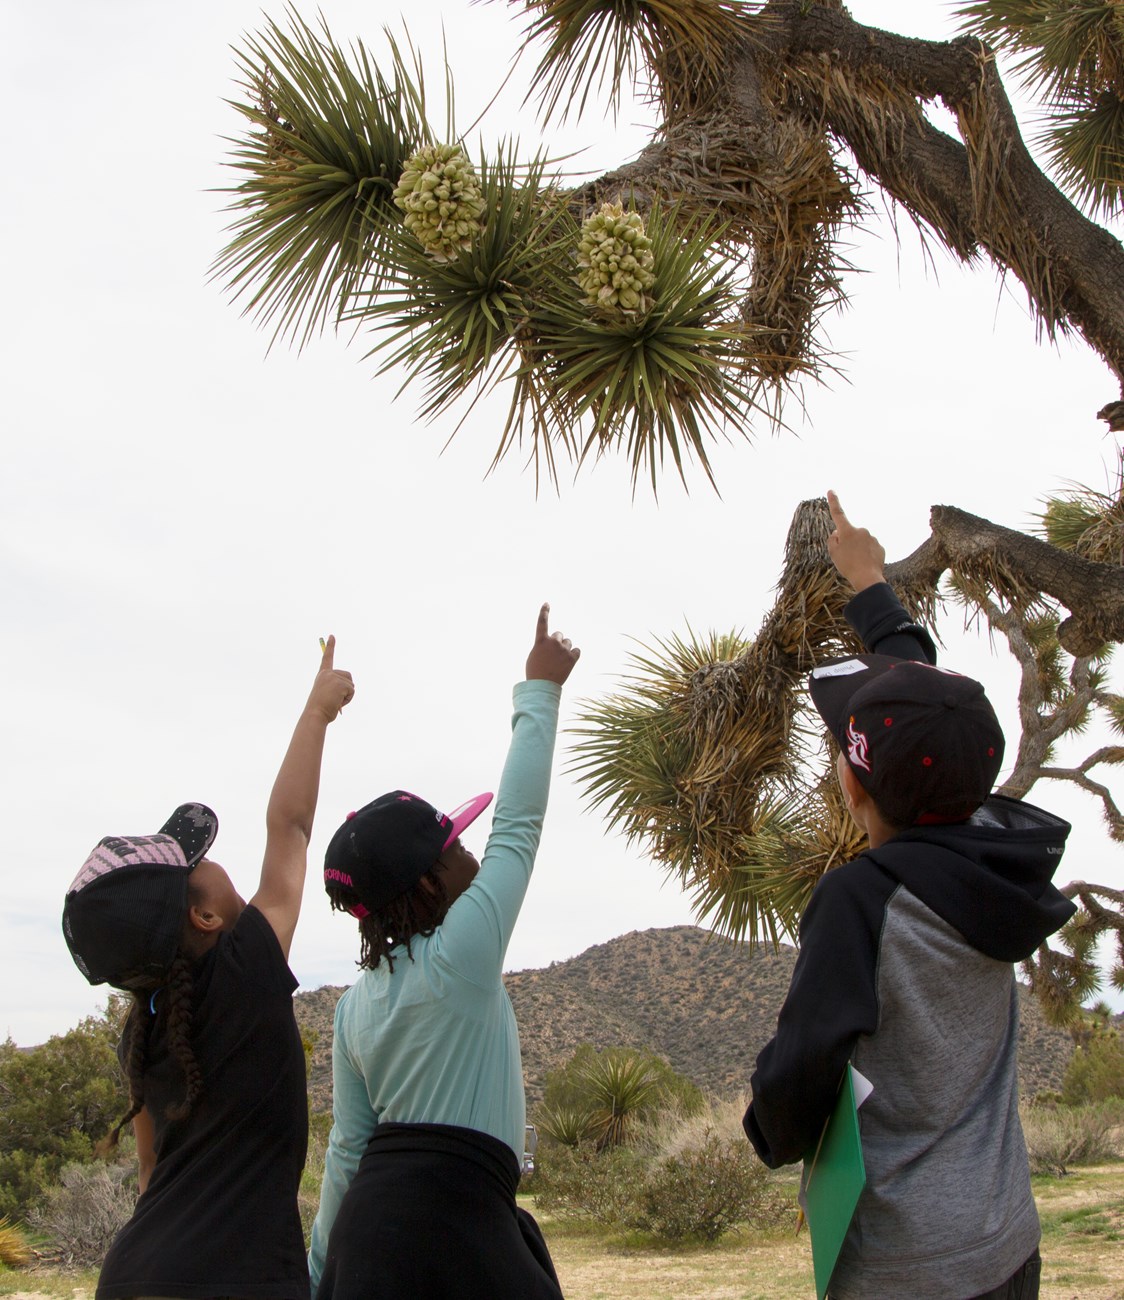 Three young kids standing pointing up at a Joshua tree.